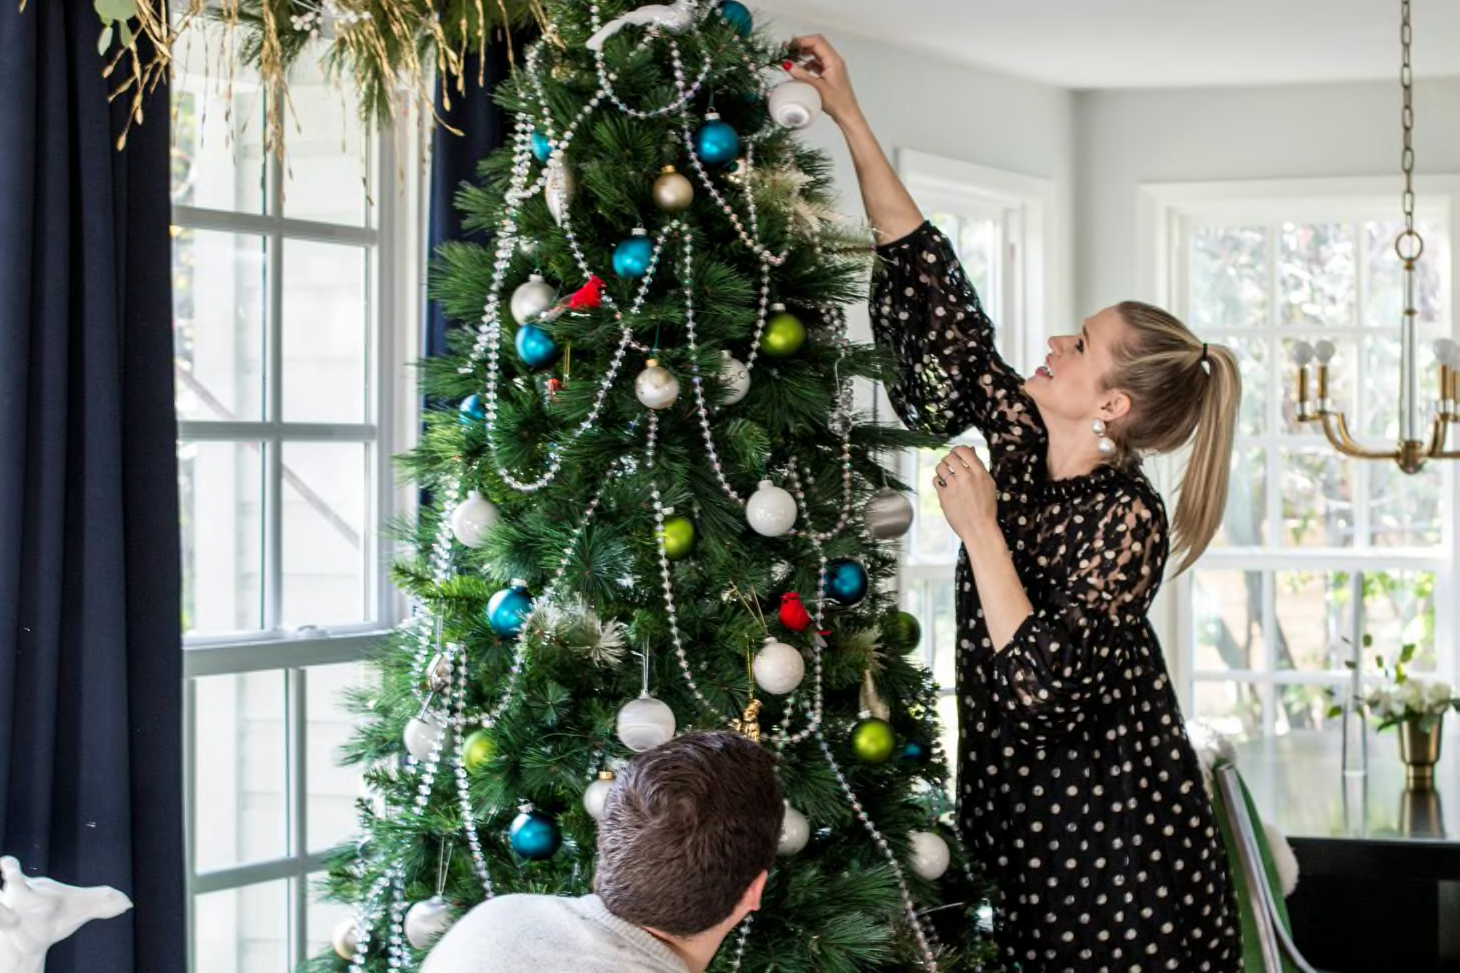 Here’s How to Give Your Christmas Tree a Modern Twist